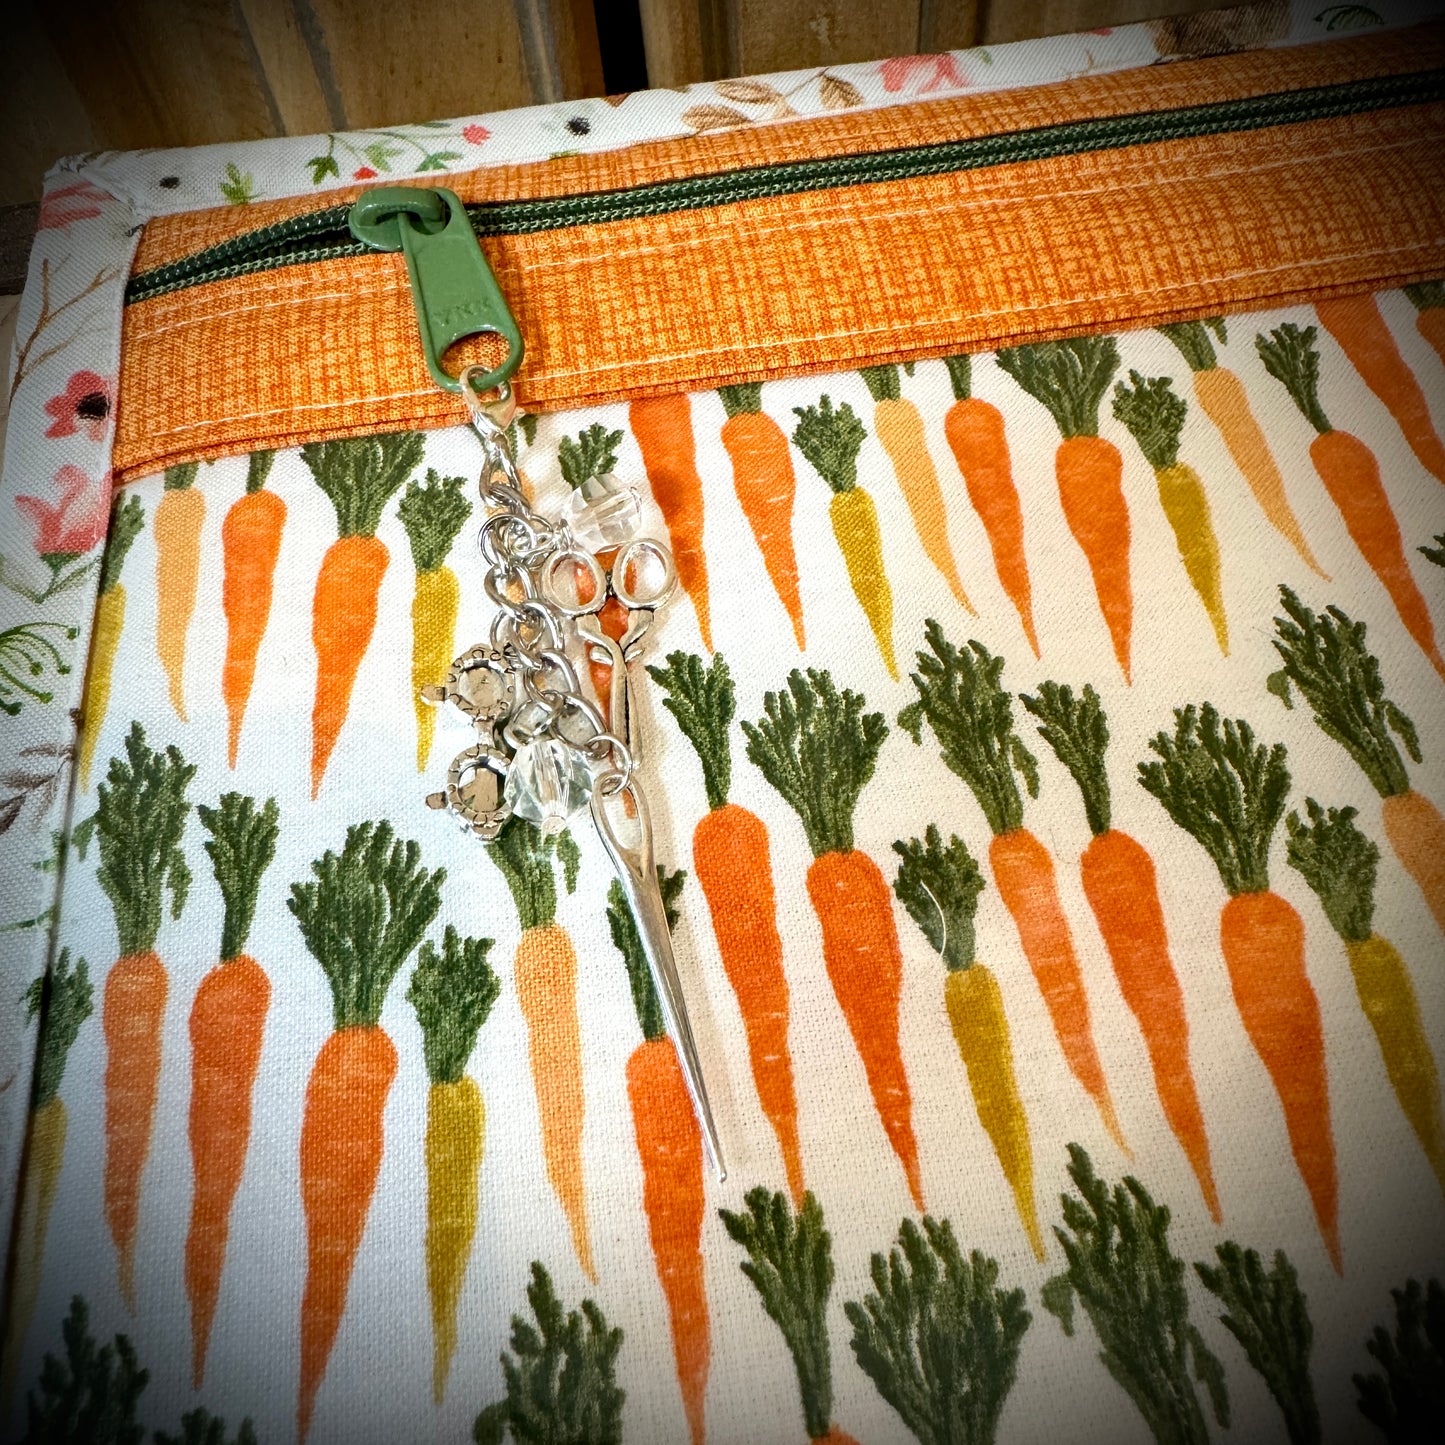 Easter Bunny and Carrot Vinyl front project bag